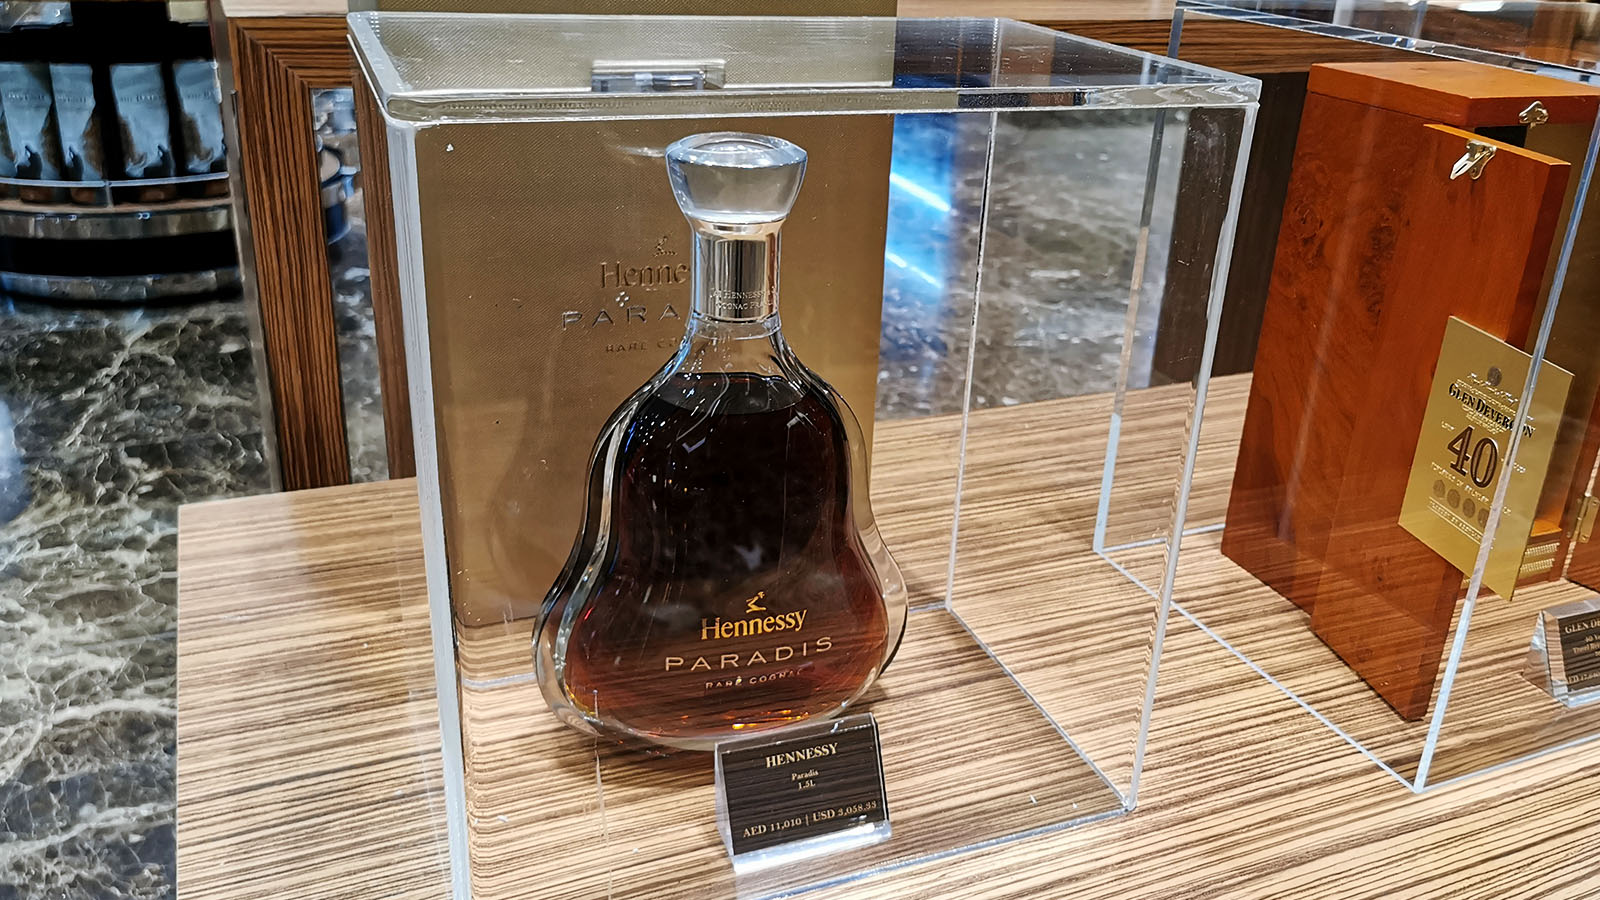 Buy Hennessy Paradis in the Emirates First Class Lounge in Dubai Concourse A